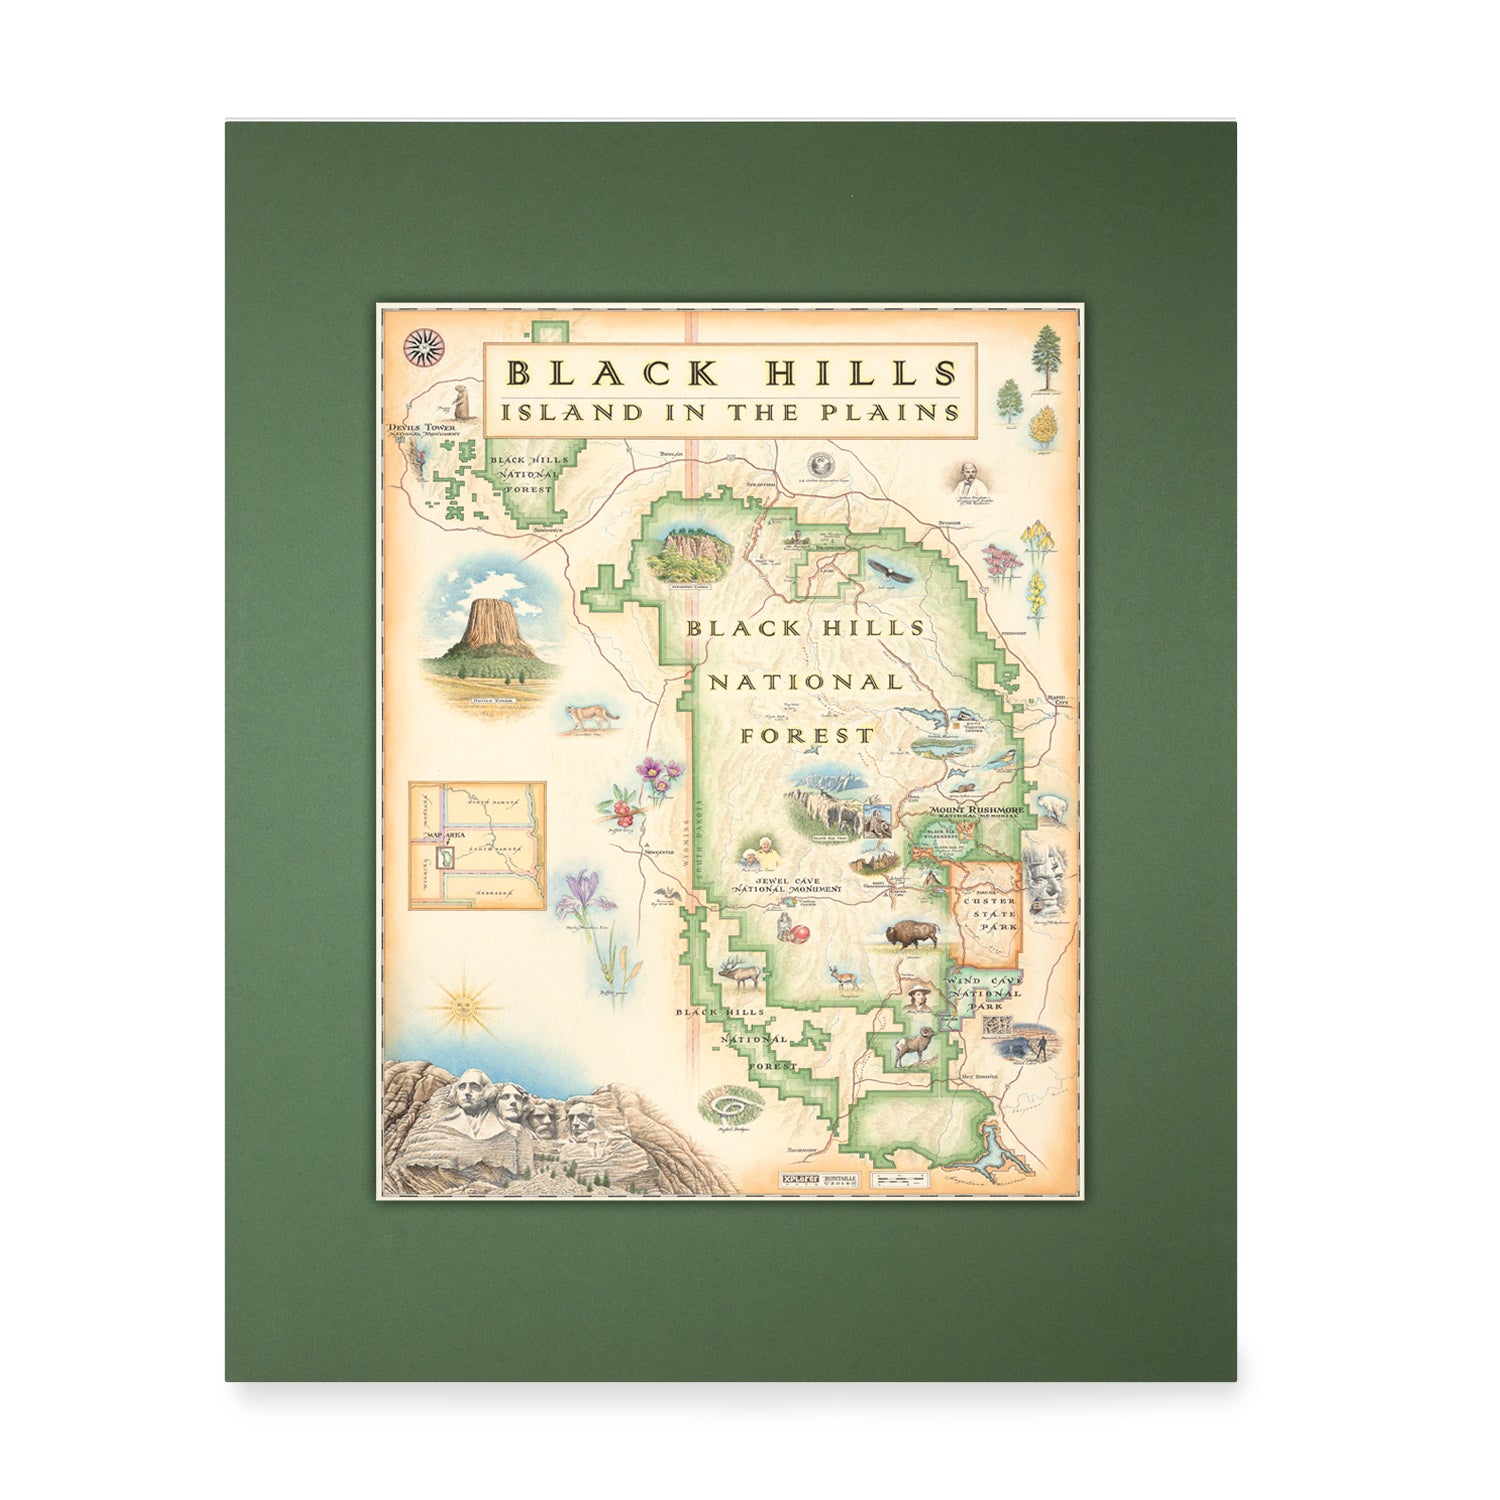 Green pre-matted Black Hills National Forest Mini-Map. The map features Mount Rushmore, Jewel Cave National Monument, Custer State Park, and Devil's Tower. The map also includes flora and fauna of areas such as Bison, Elk, Big Horn Sheep, Bald Eagle, Rocky Mountain Iris, and Buffalo Berries. 